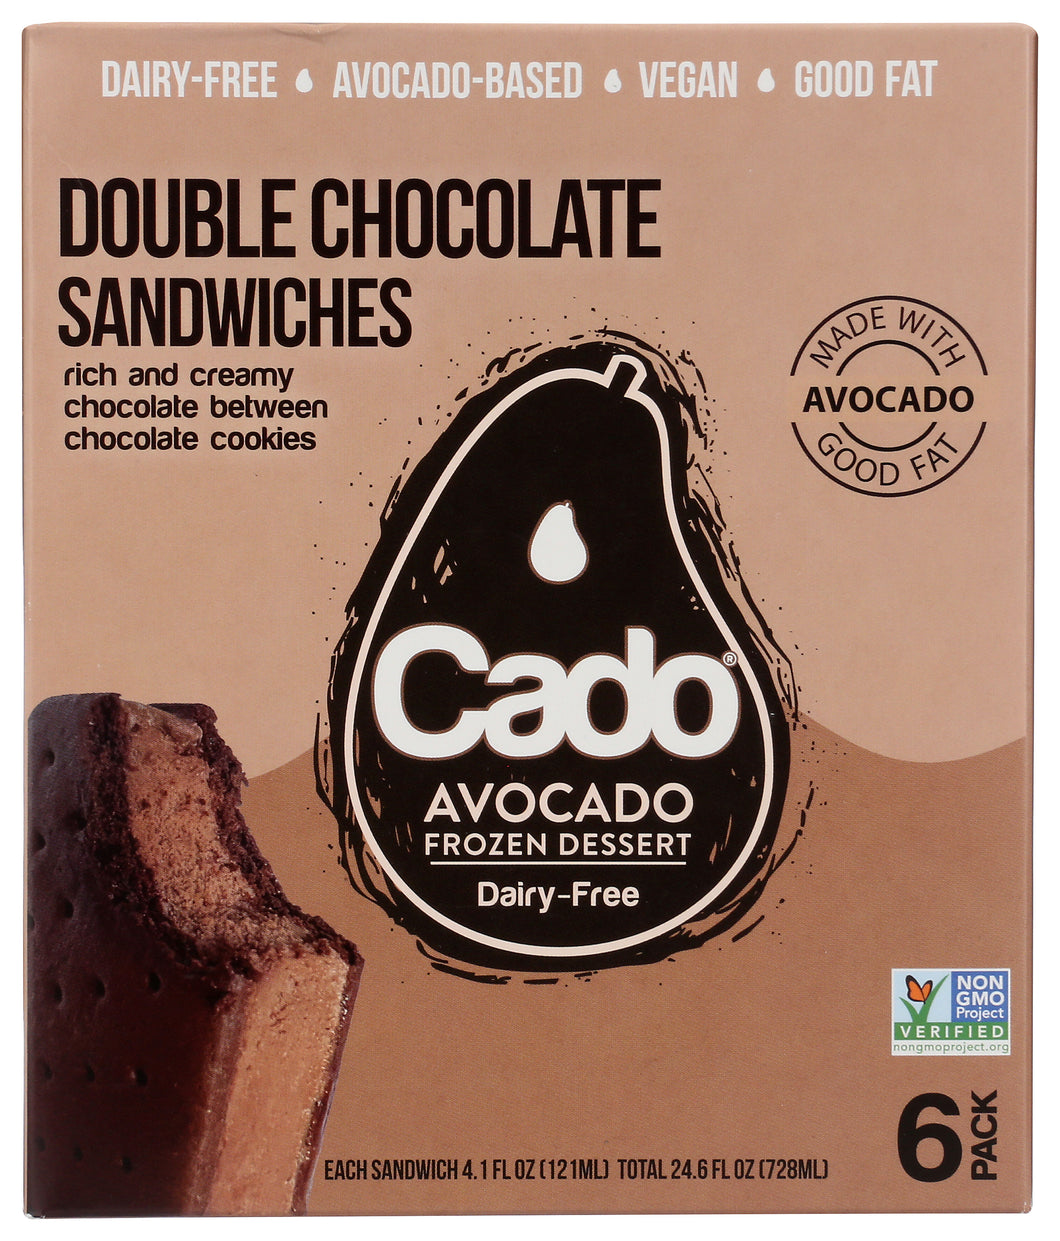 NEW! Double Chocolate Sandwiches